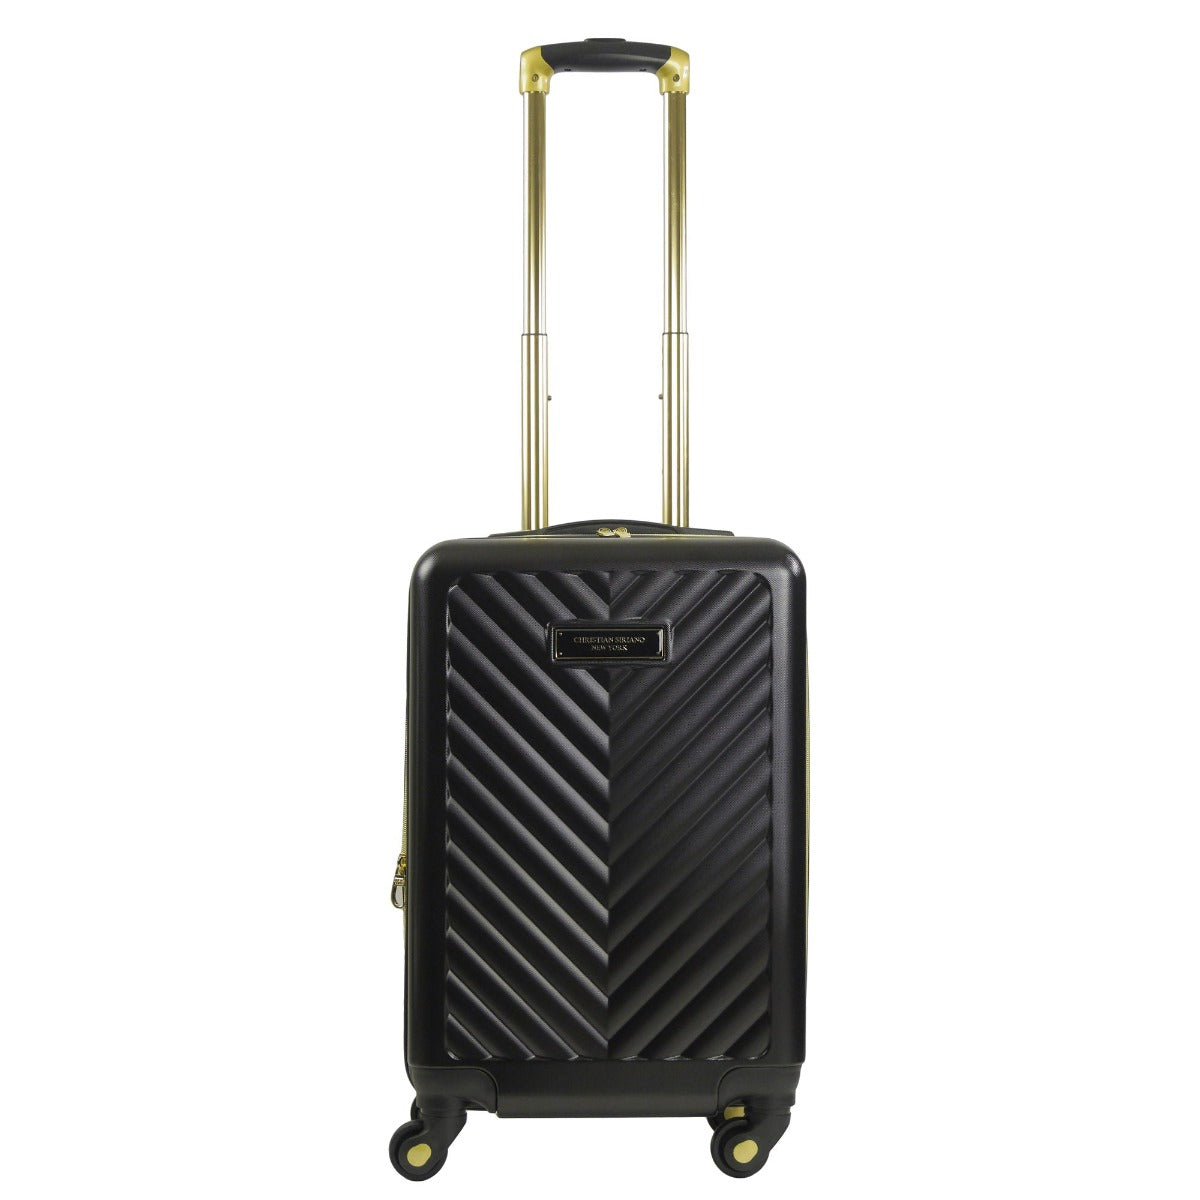 Ful Christian Serrano Addie 22" hardside spinner suitcase suitcases luggage black - best carry on suitcase for travel